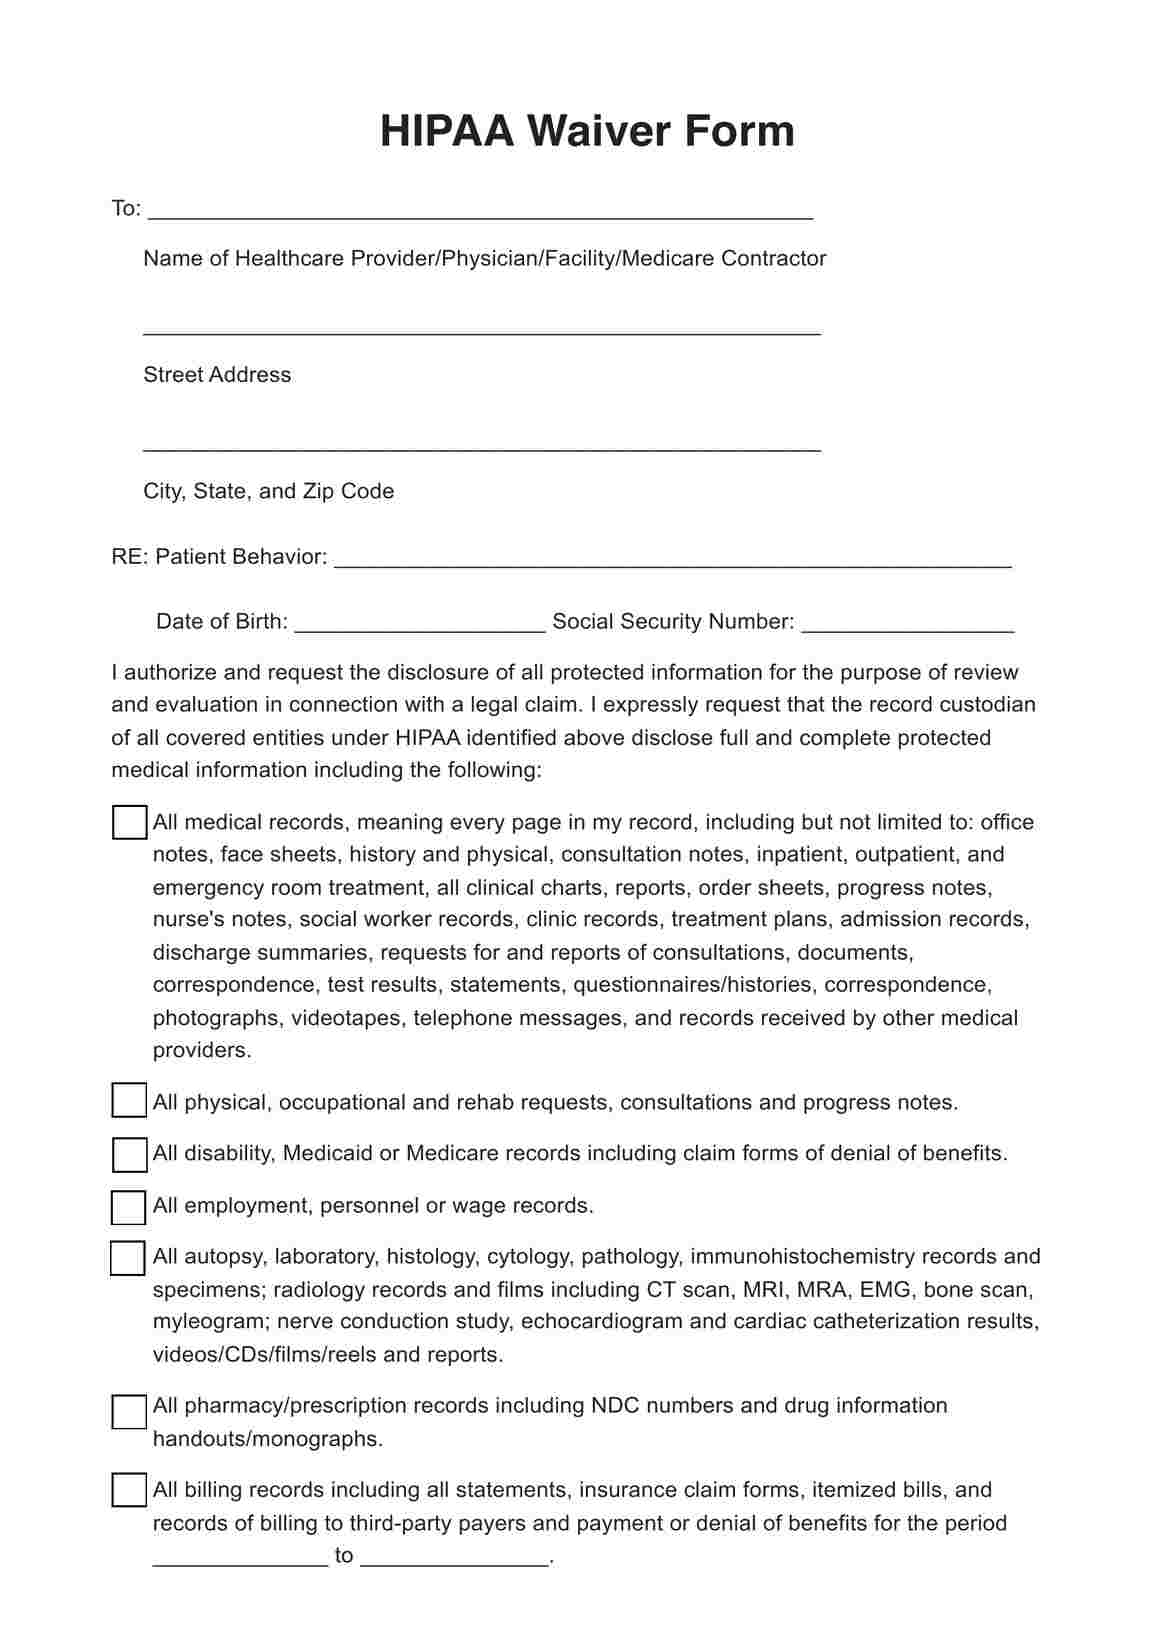 HIPAA Waiver Forms PDF Example